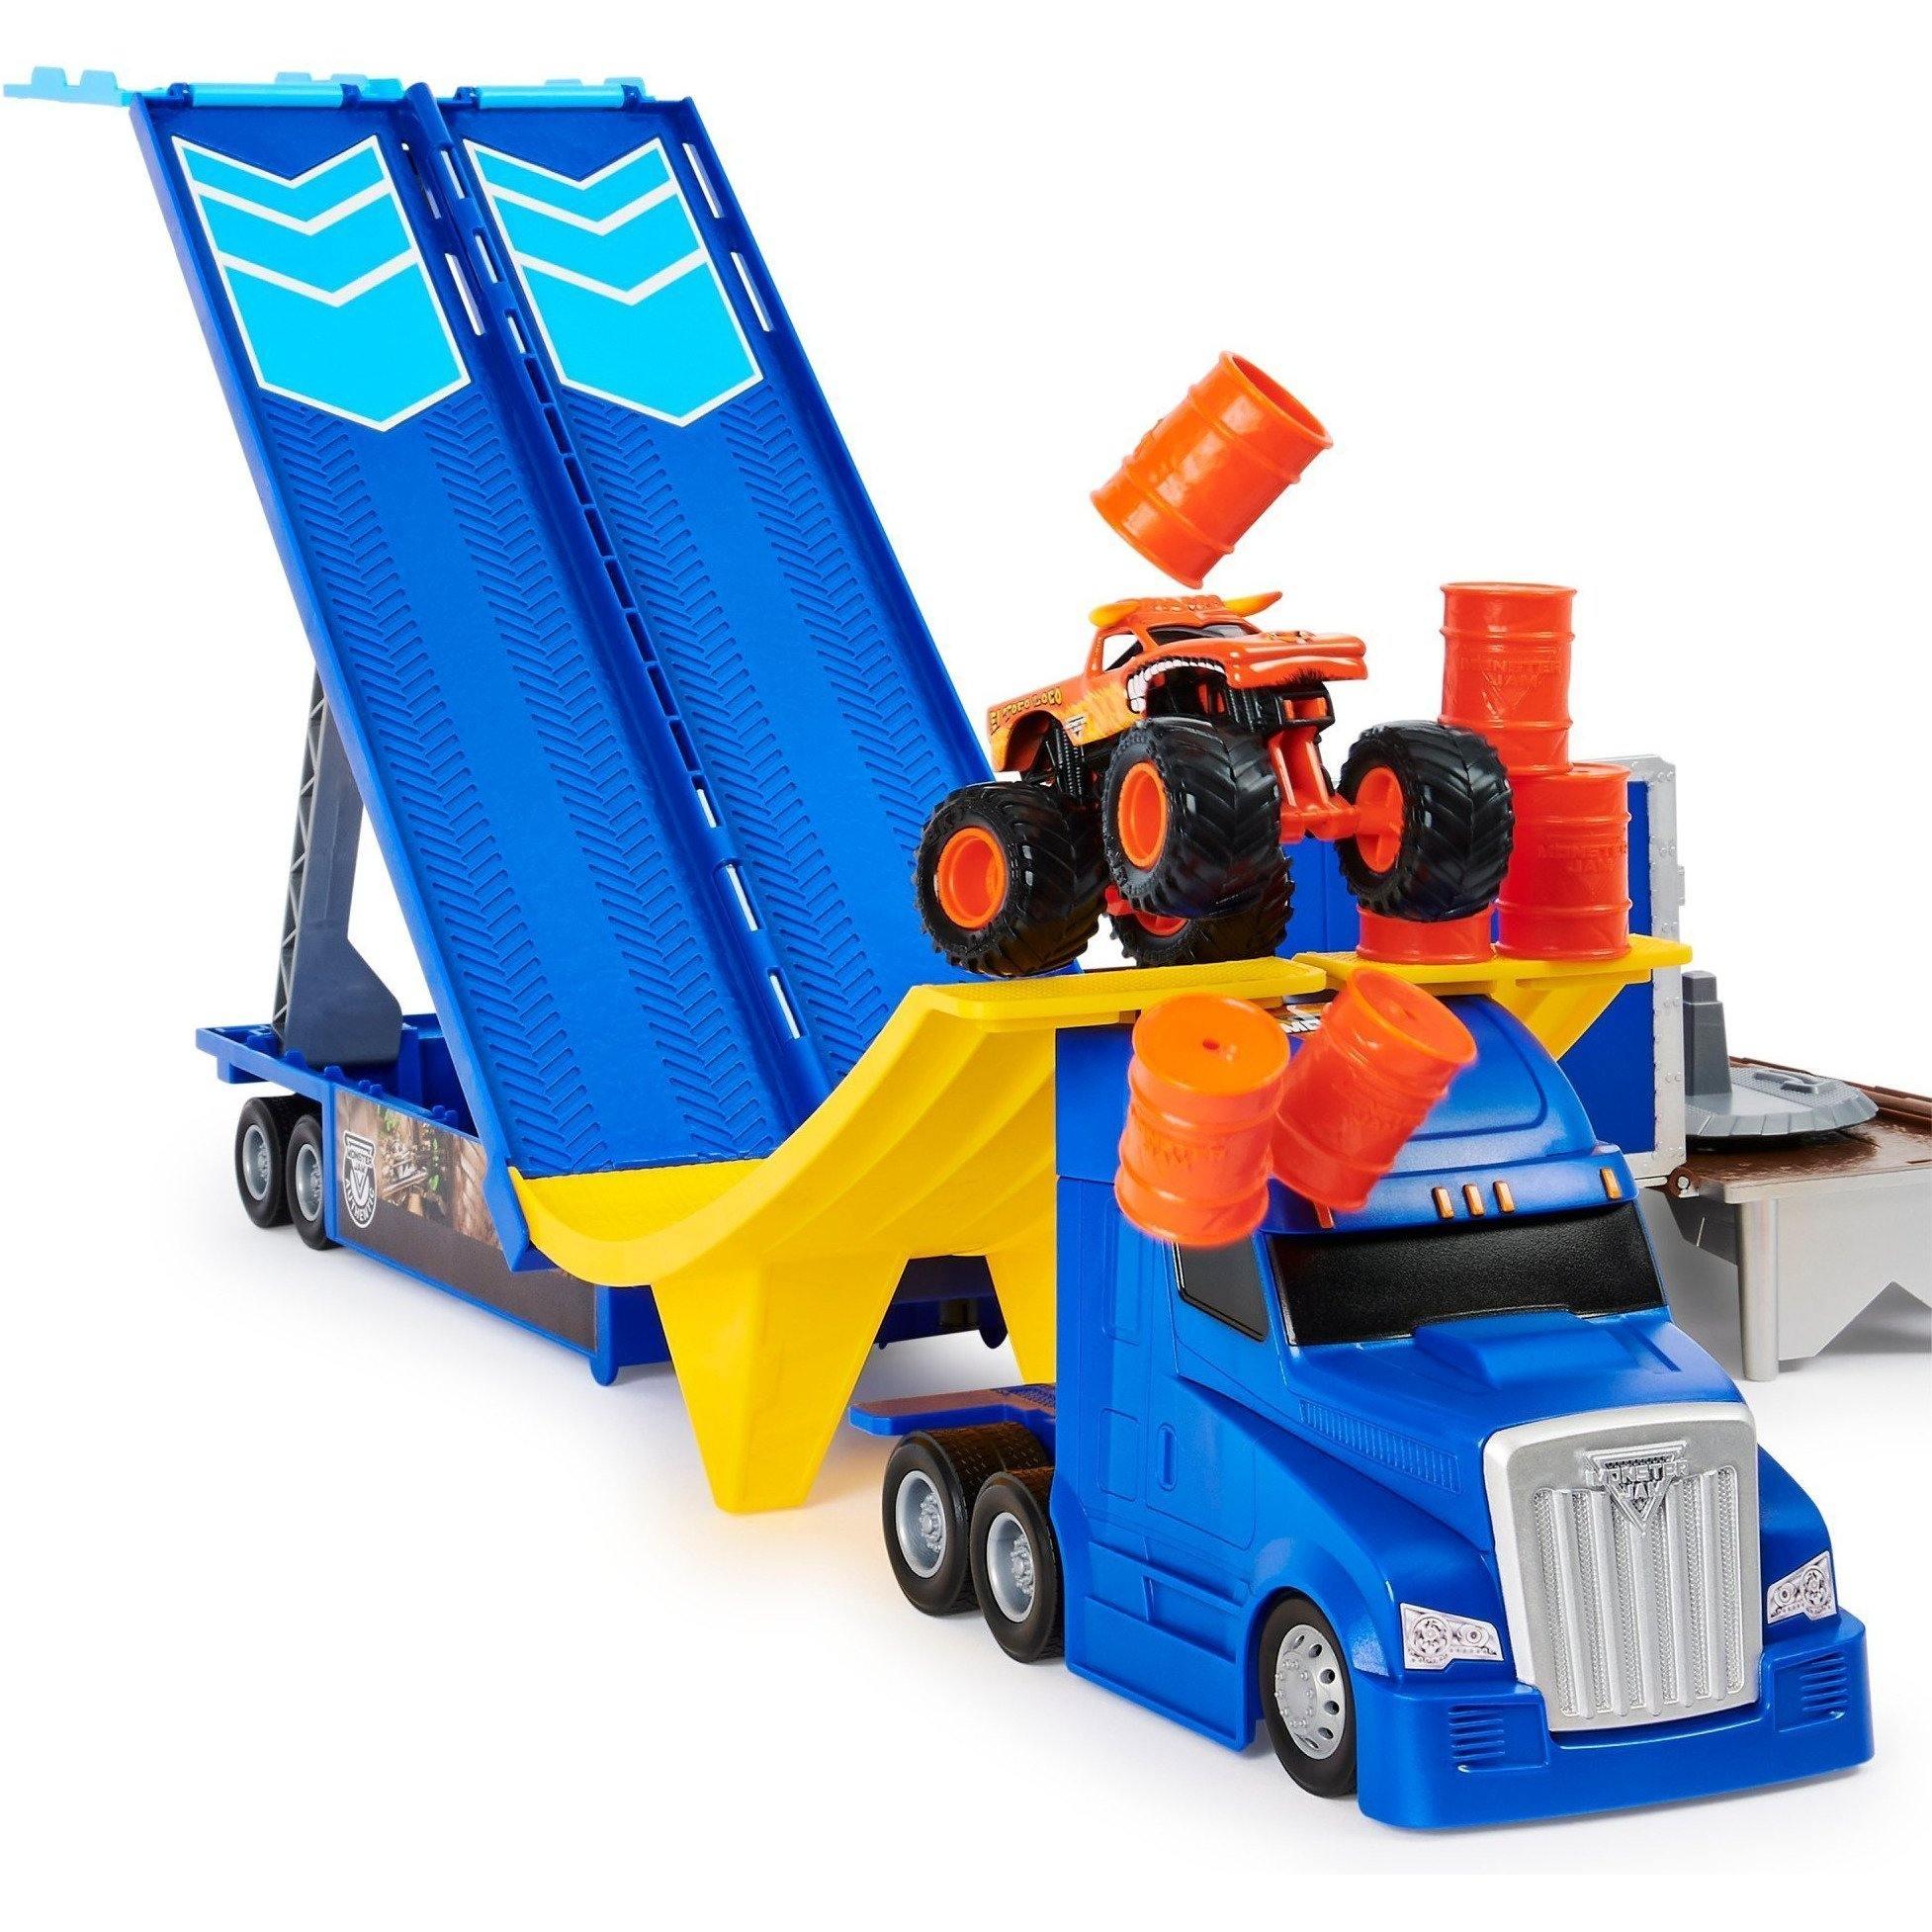 Spin Master Monster Jam 2 In 1 Transforming Hauler Playset - BumbleToys - 5-7 Years, Arabic Triangle Trading, Boys, Monster Jam, Moster Jam, Vehicles & Play Sets